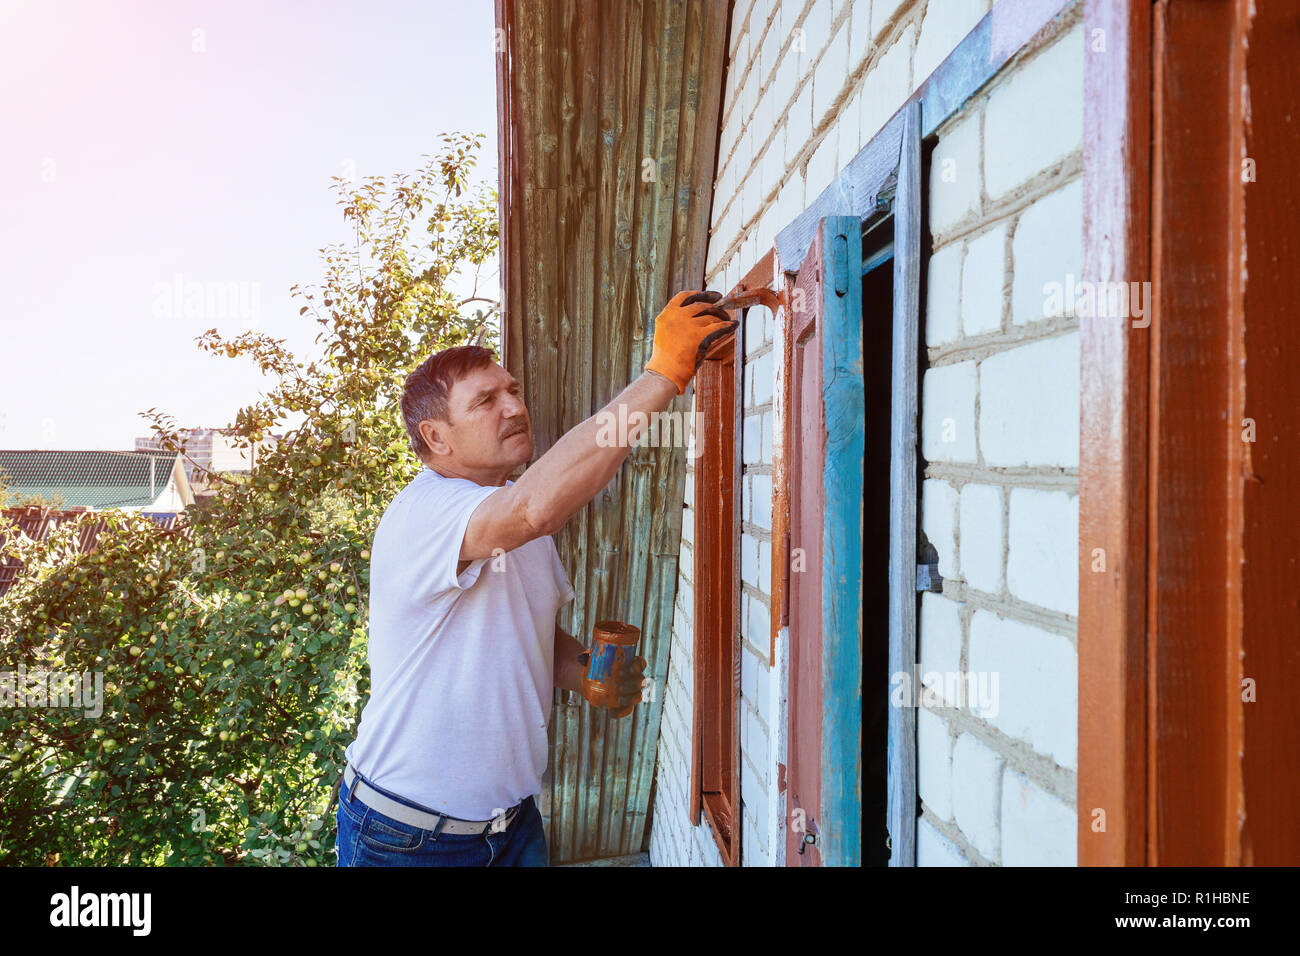 Painter painting the windows of a exterior house Stock Photo